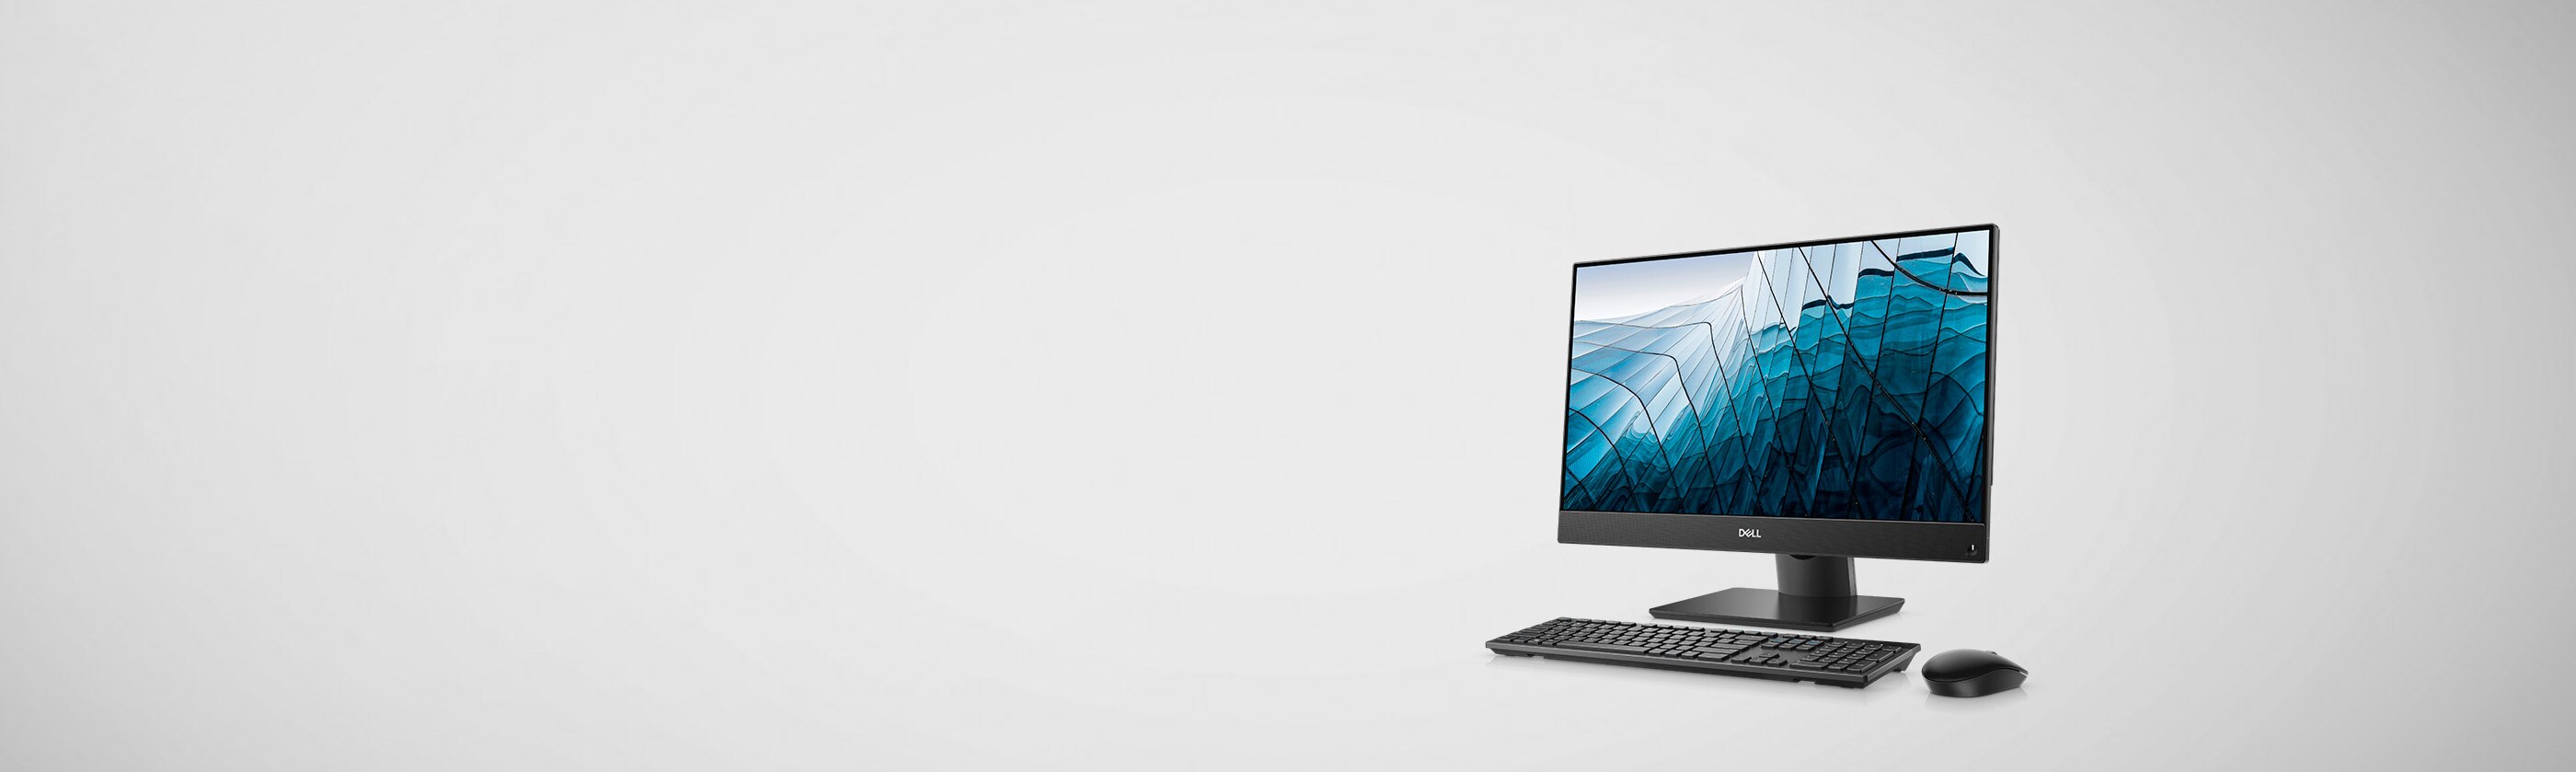 Desktop Computer - All-in-One PCs | Dell India